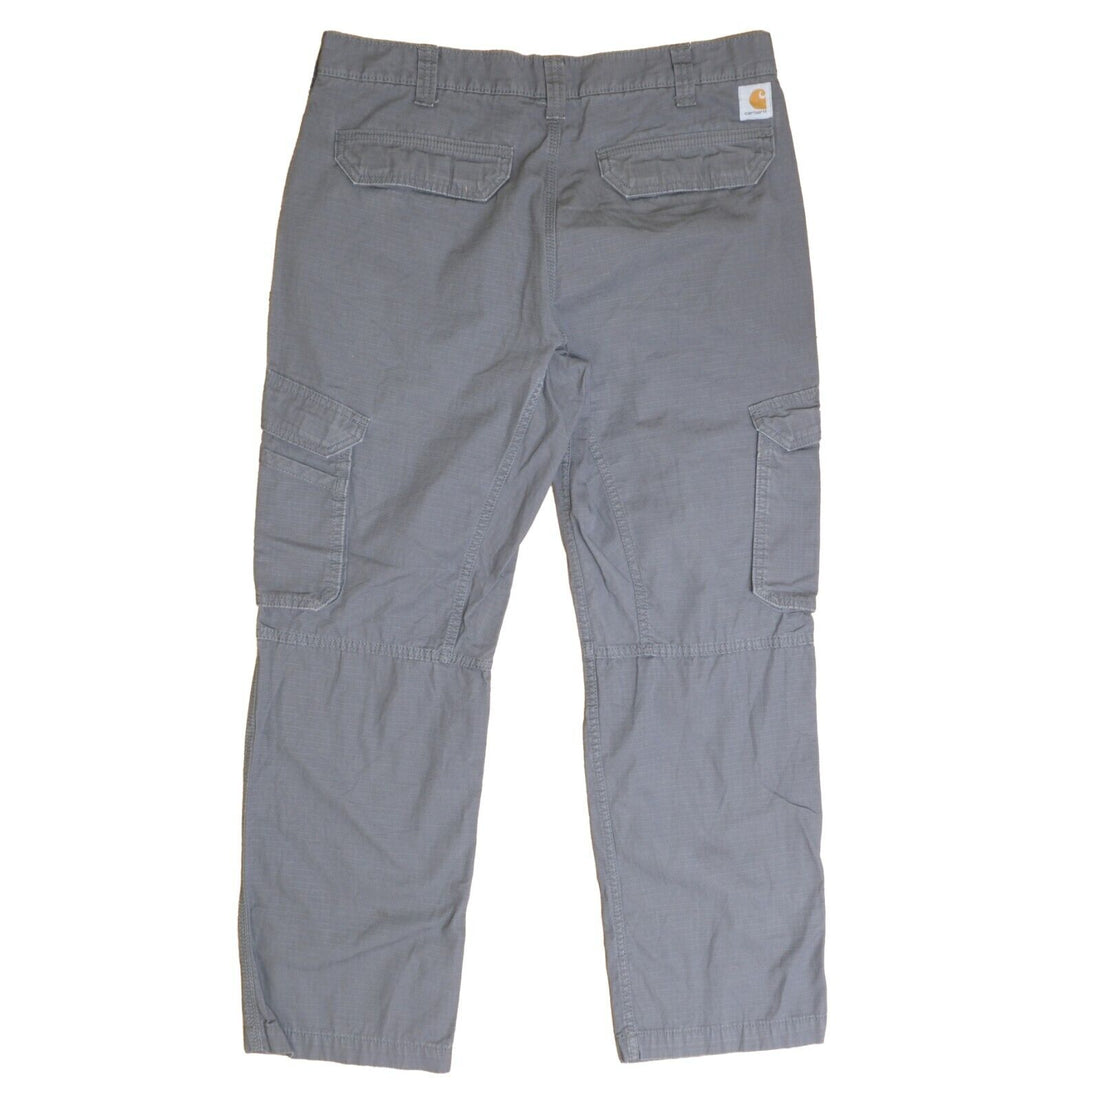 Carhartt Rip Stop Cargo Pants Size 36 X 30 Gray Relaxed Fit